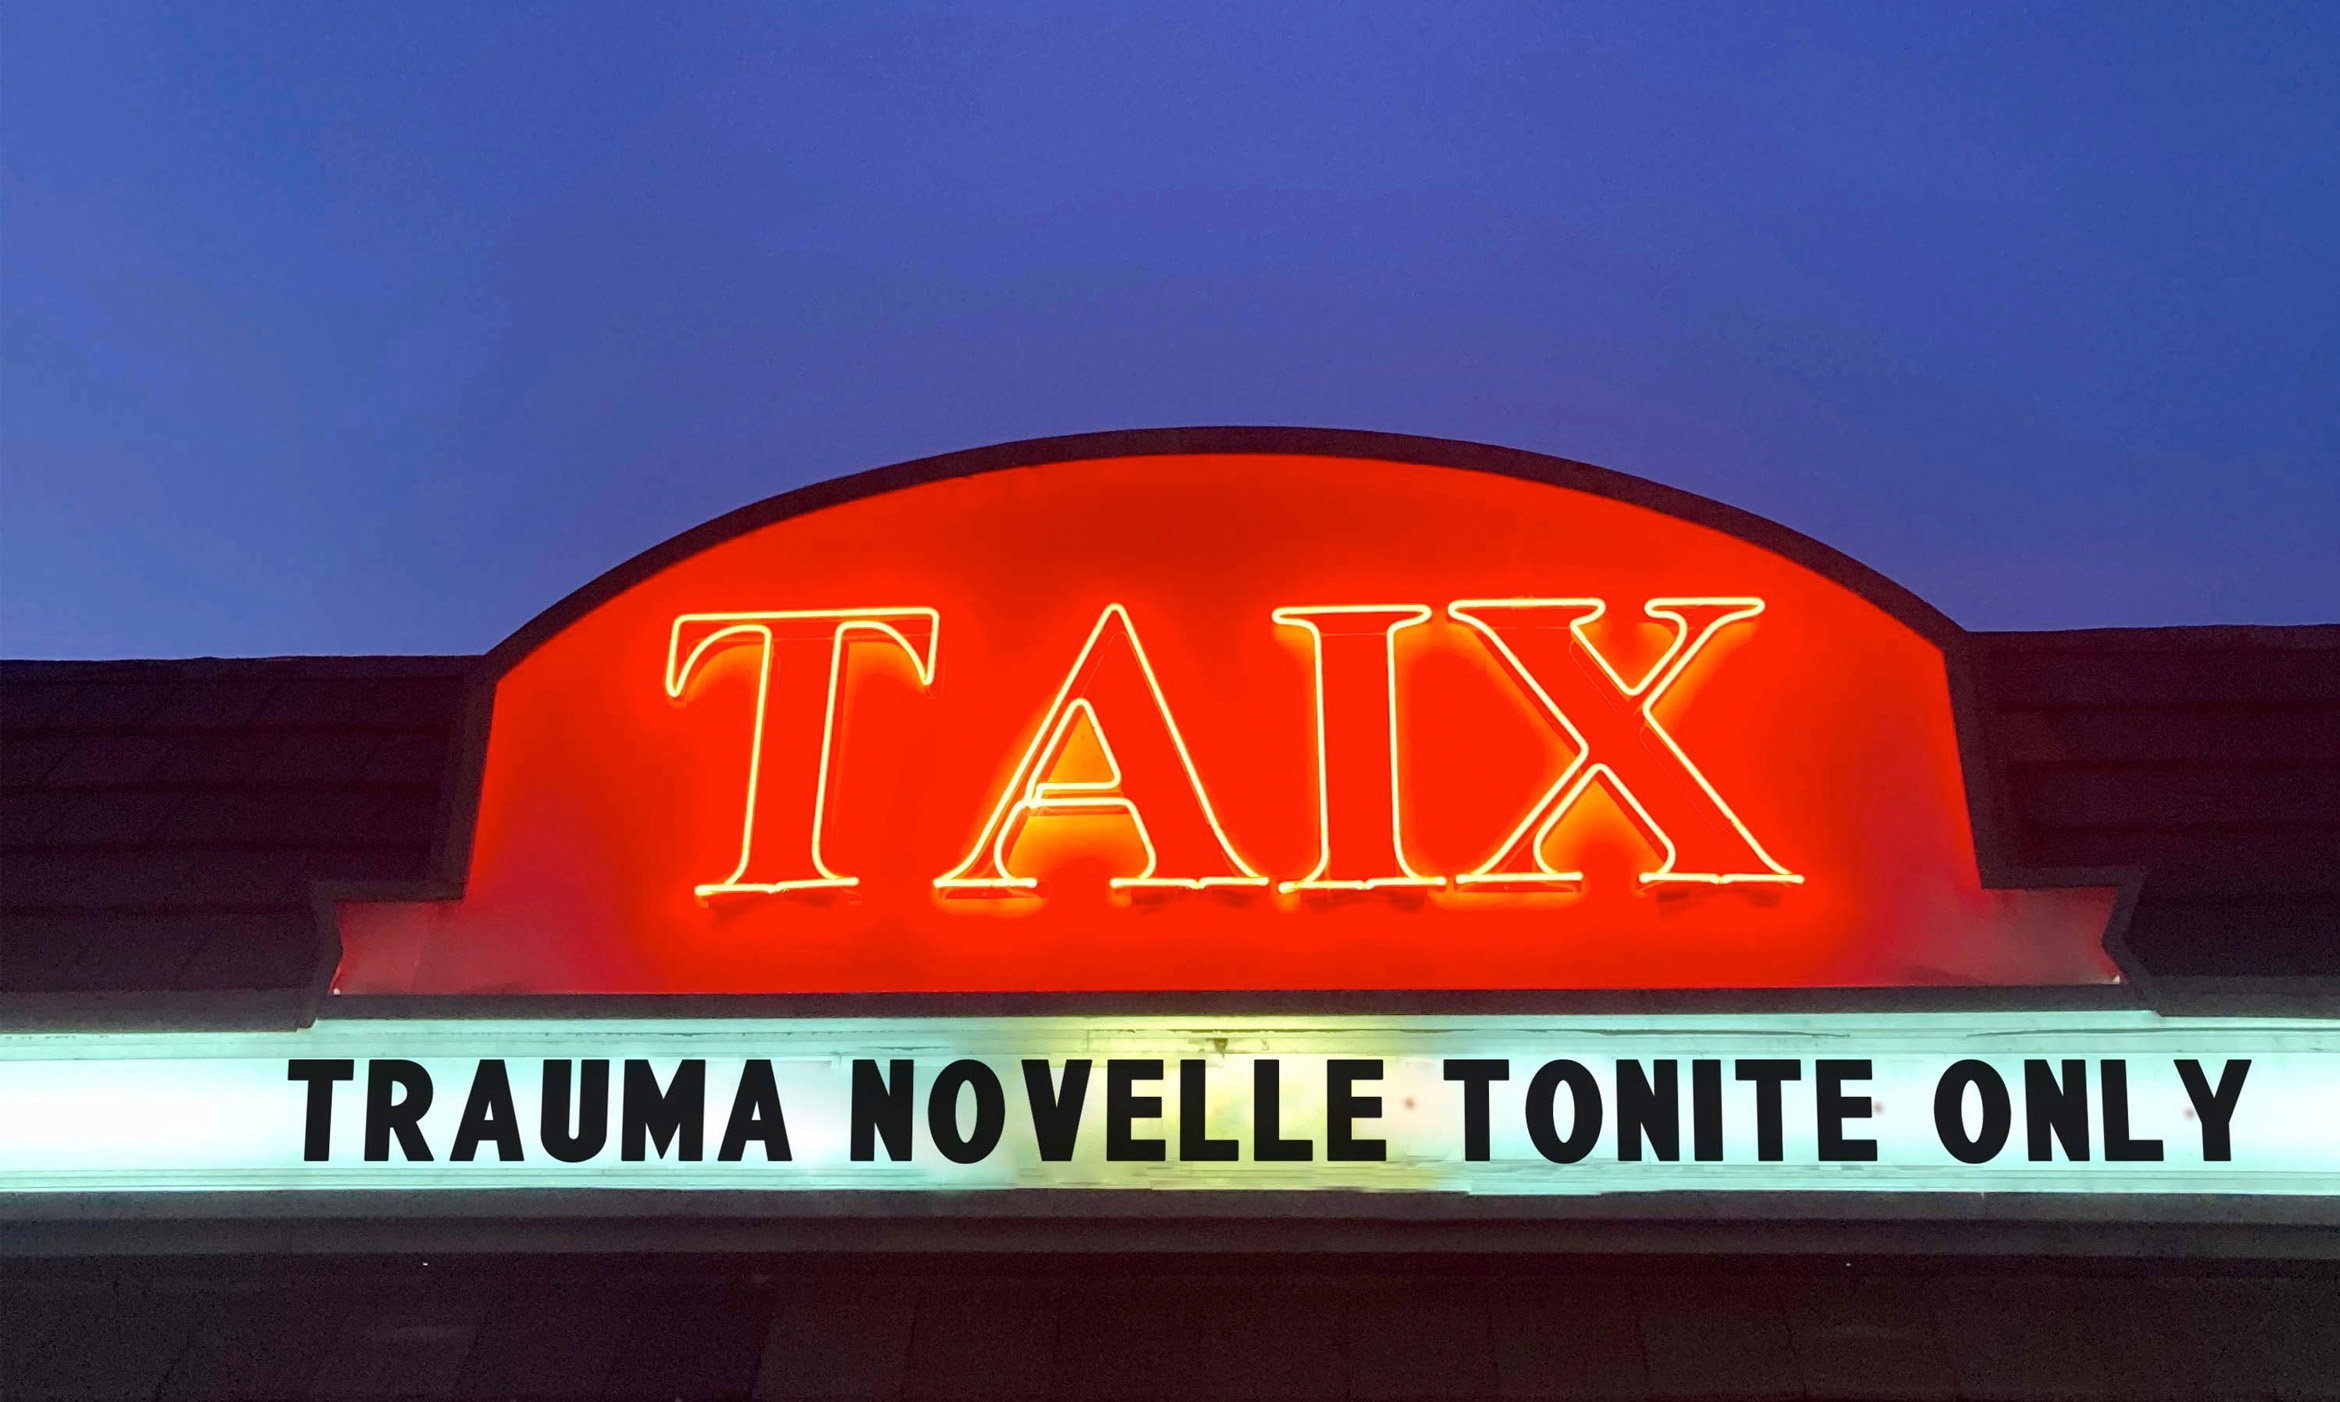 Trauma Novelle on a marquee sign in Los Angeles